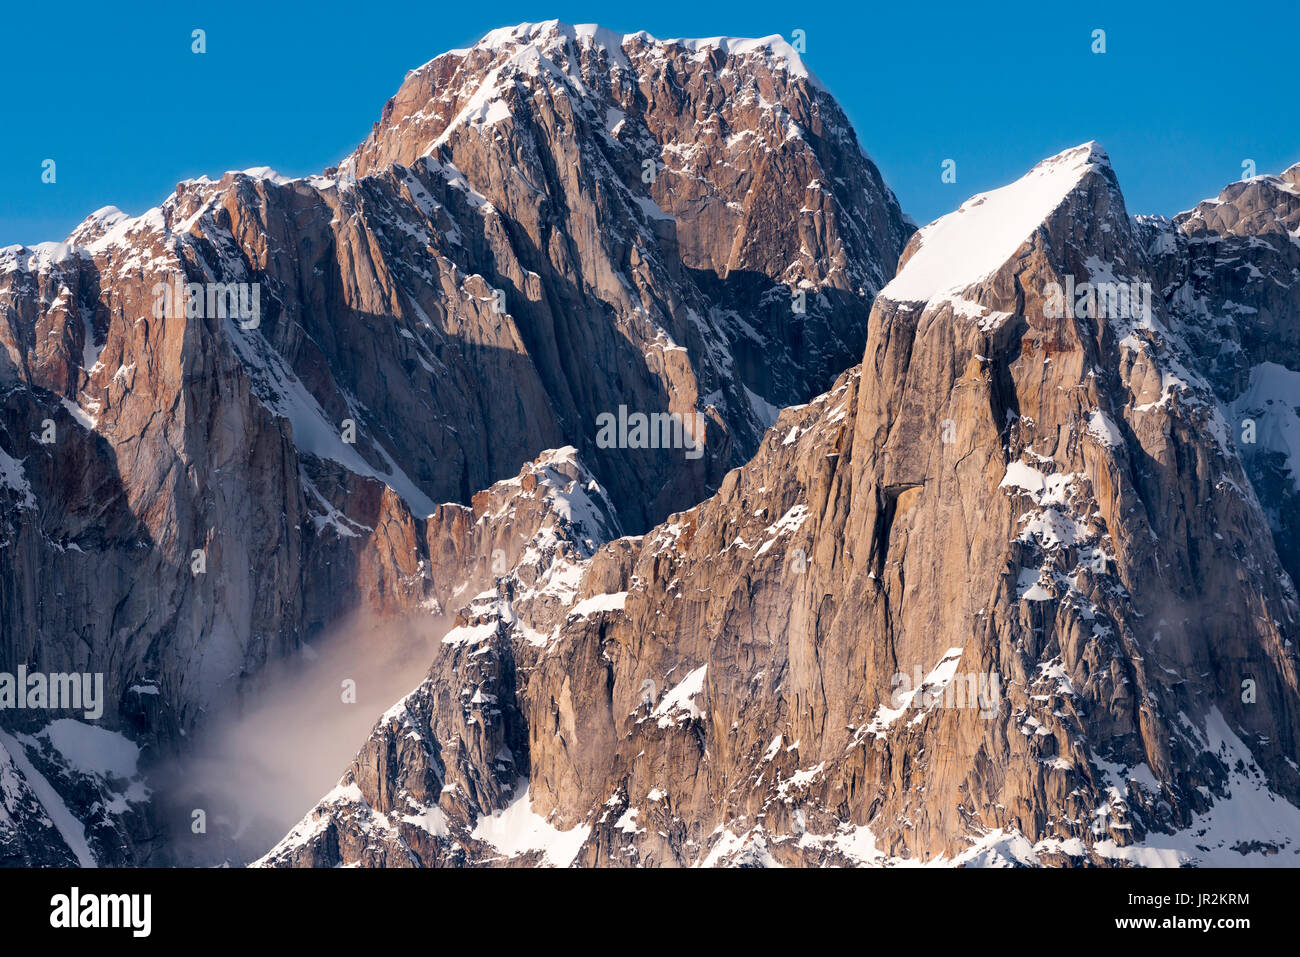 Aerial View Of Moose's Tooth And Broken Tooth In Denali National Park, Interior Alaska, USA Stock Photo